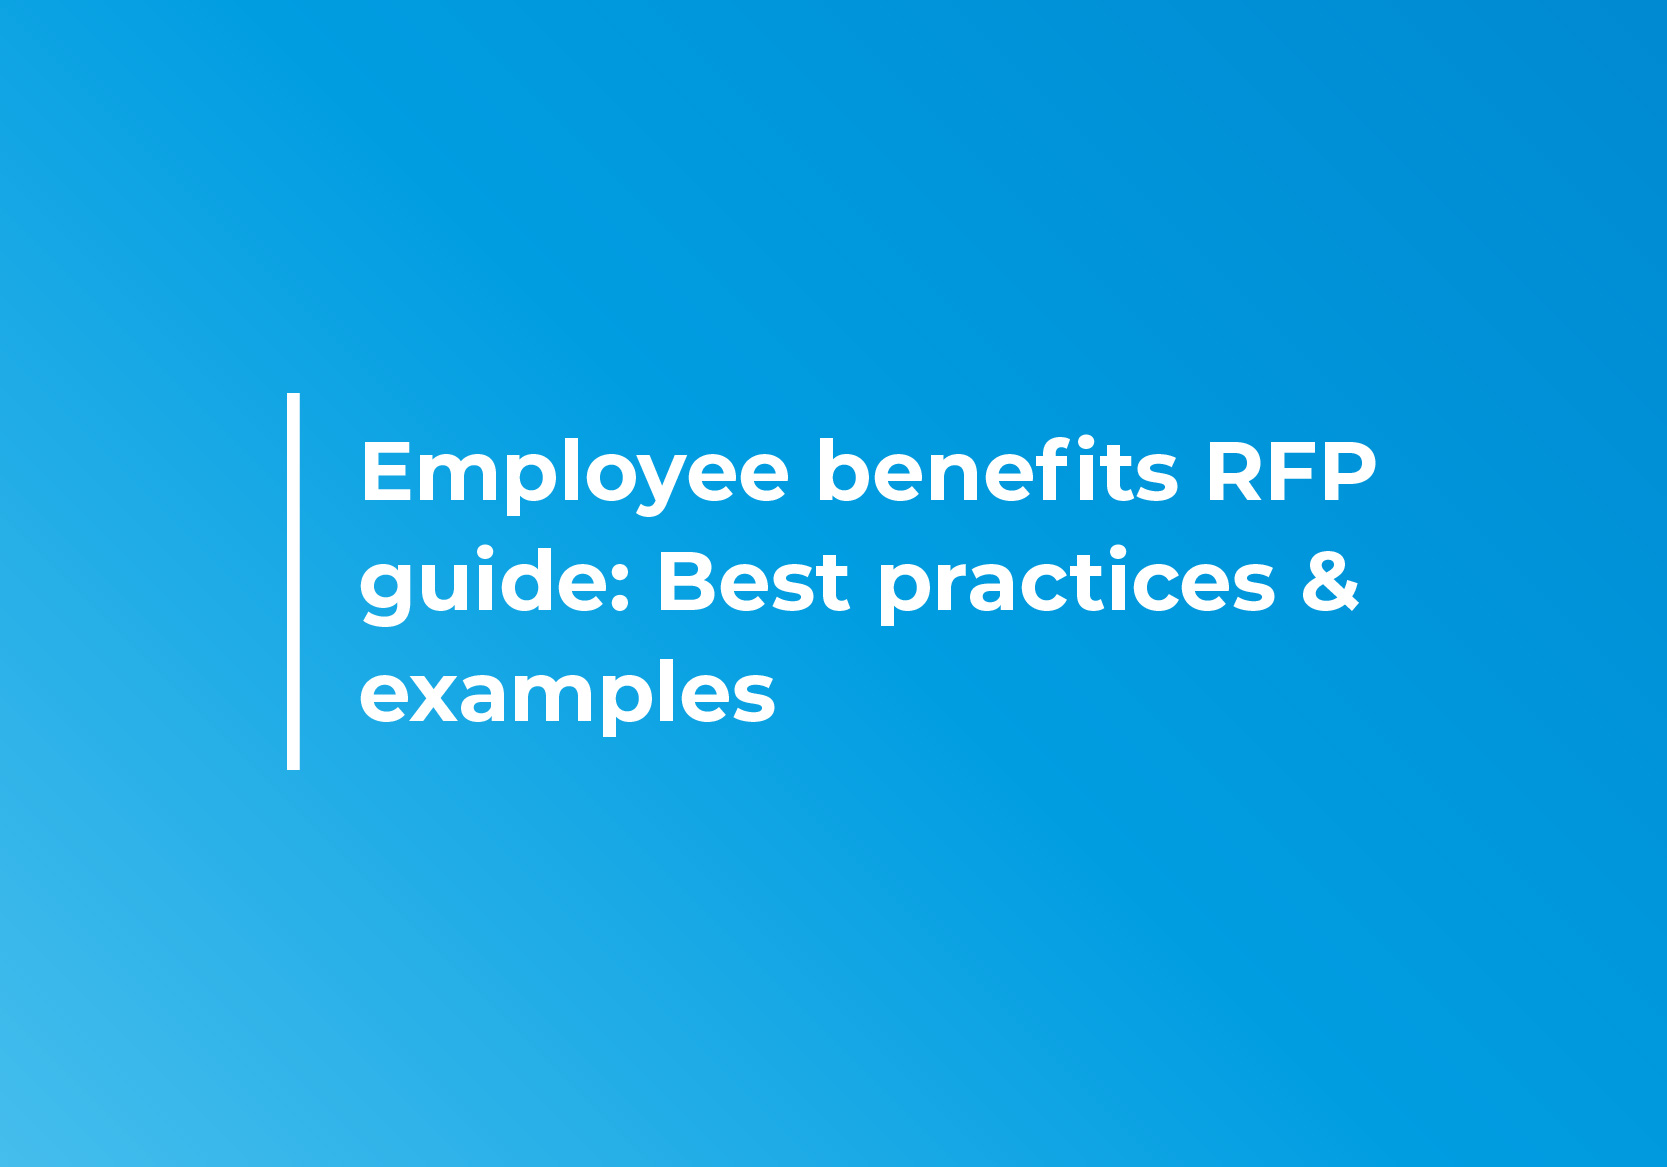 Employee benefits RFP guide: Best practices and examples